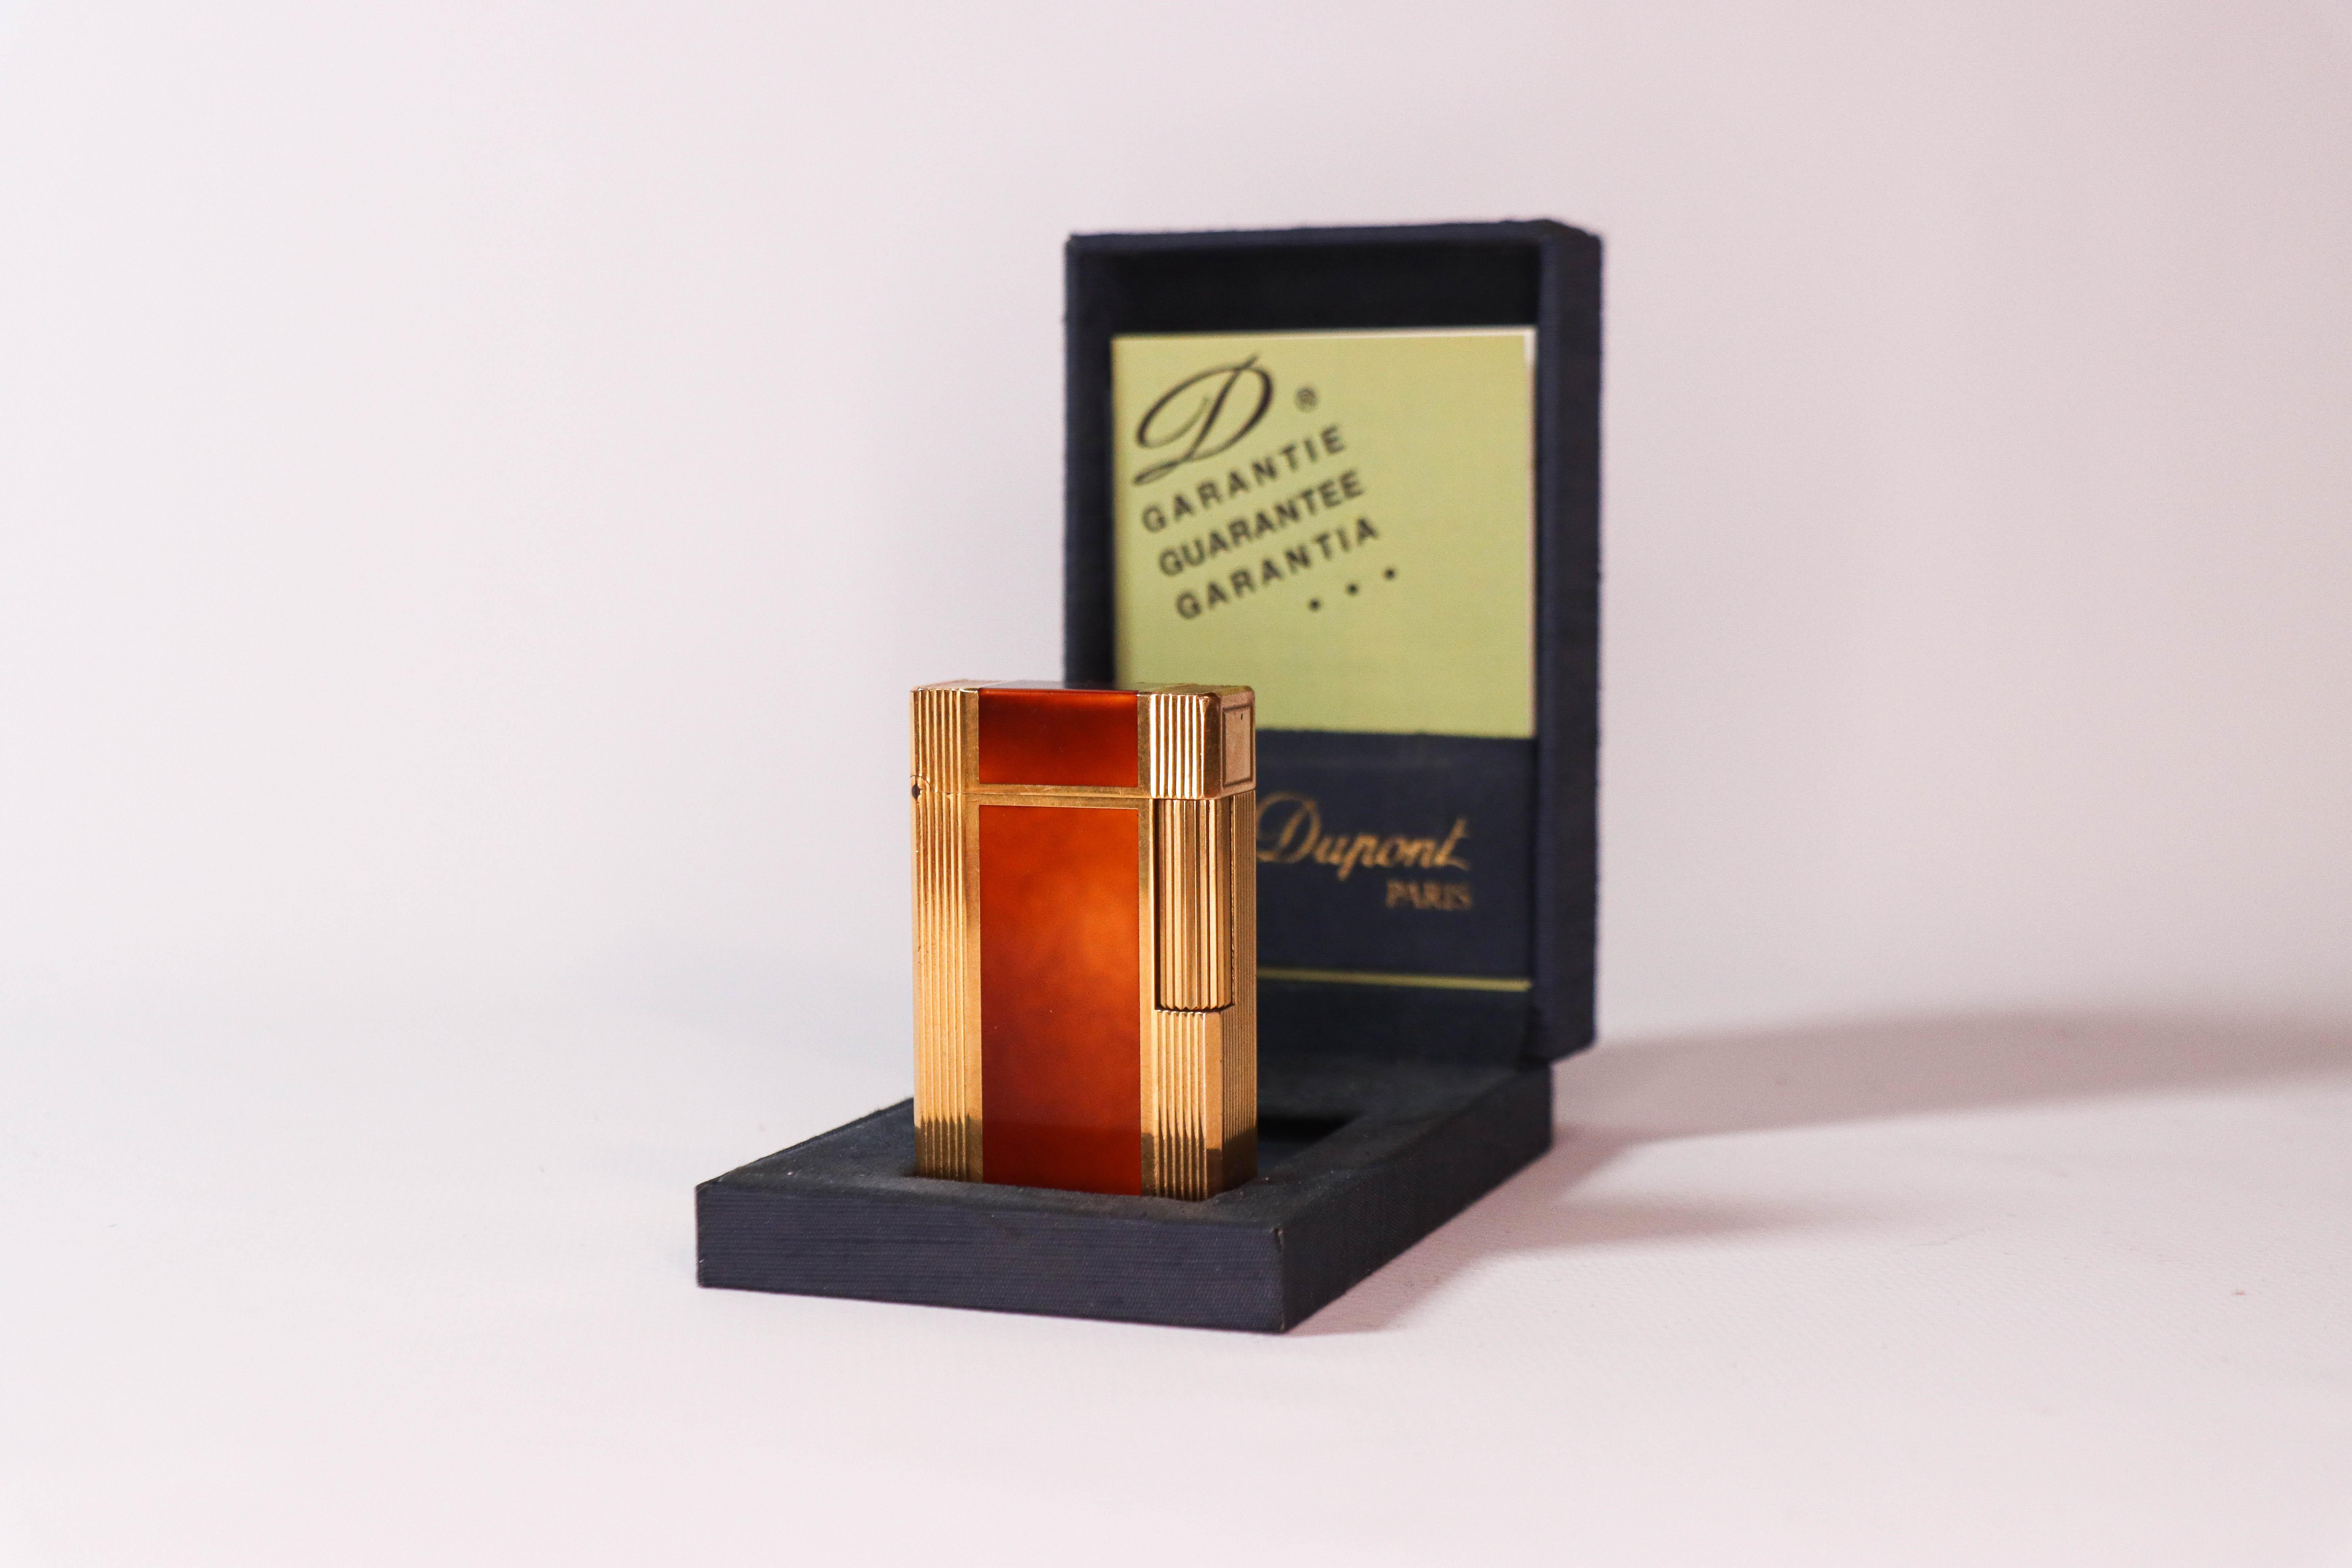 Vintage Gold Plated Ligne 1 BR ST Dupont Lighter Chinese Laque de Chine 1980s In Box

The iconic S.T. Dupont name is known for quality, well-made cigarette lighters and other luxury implements. The company’s origin can be traced to Simon